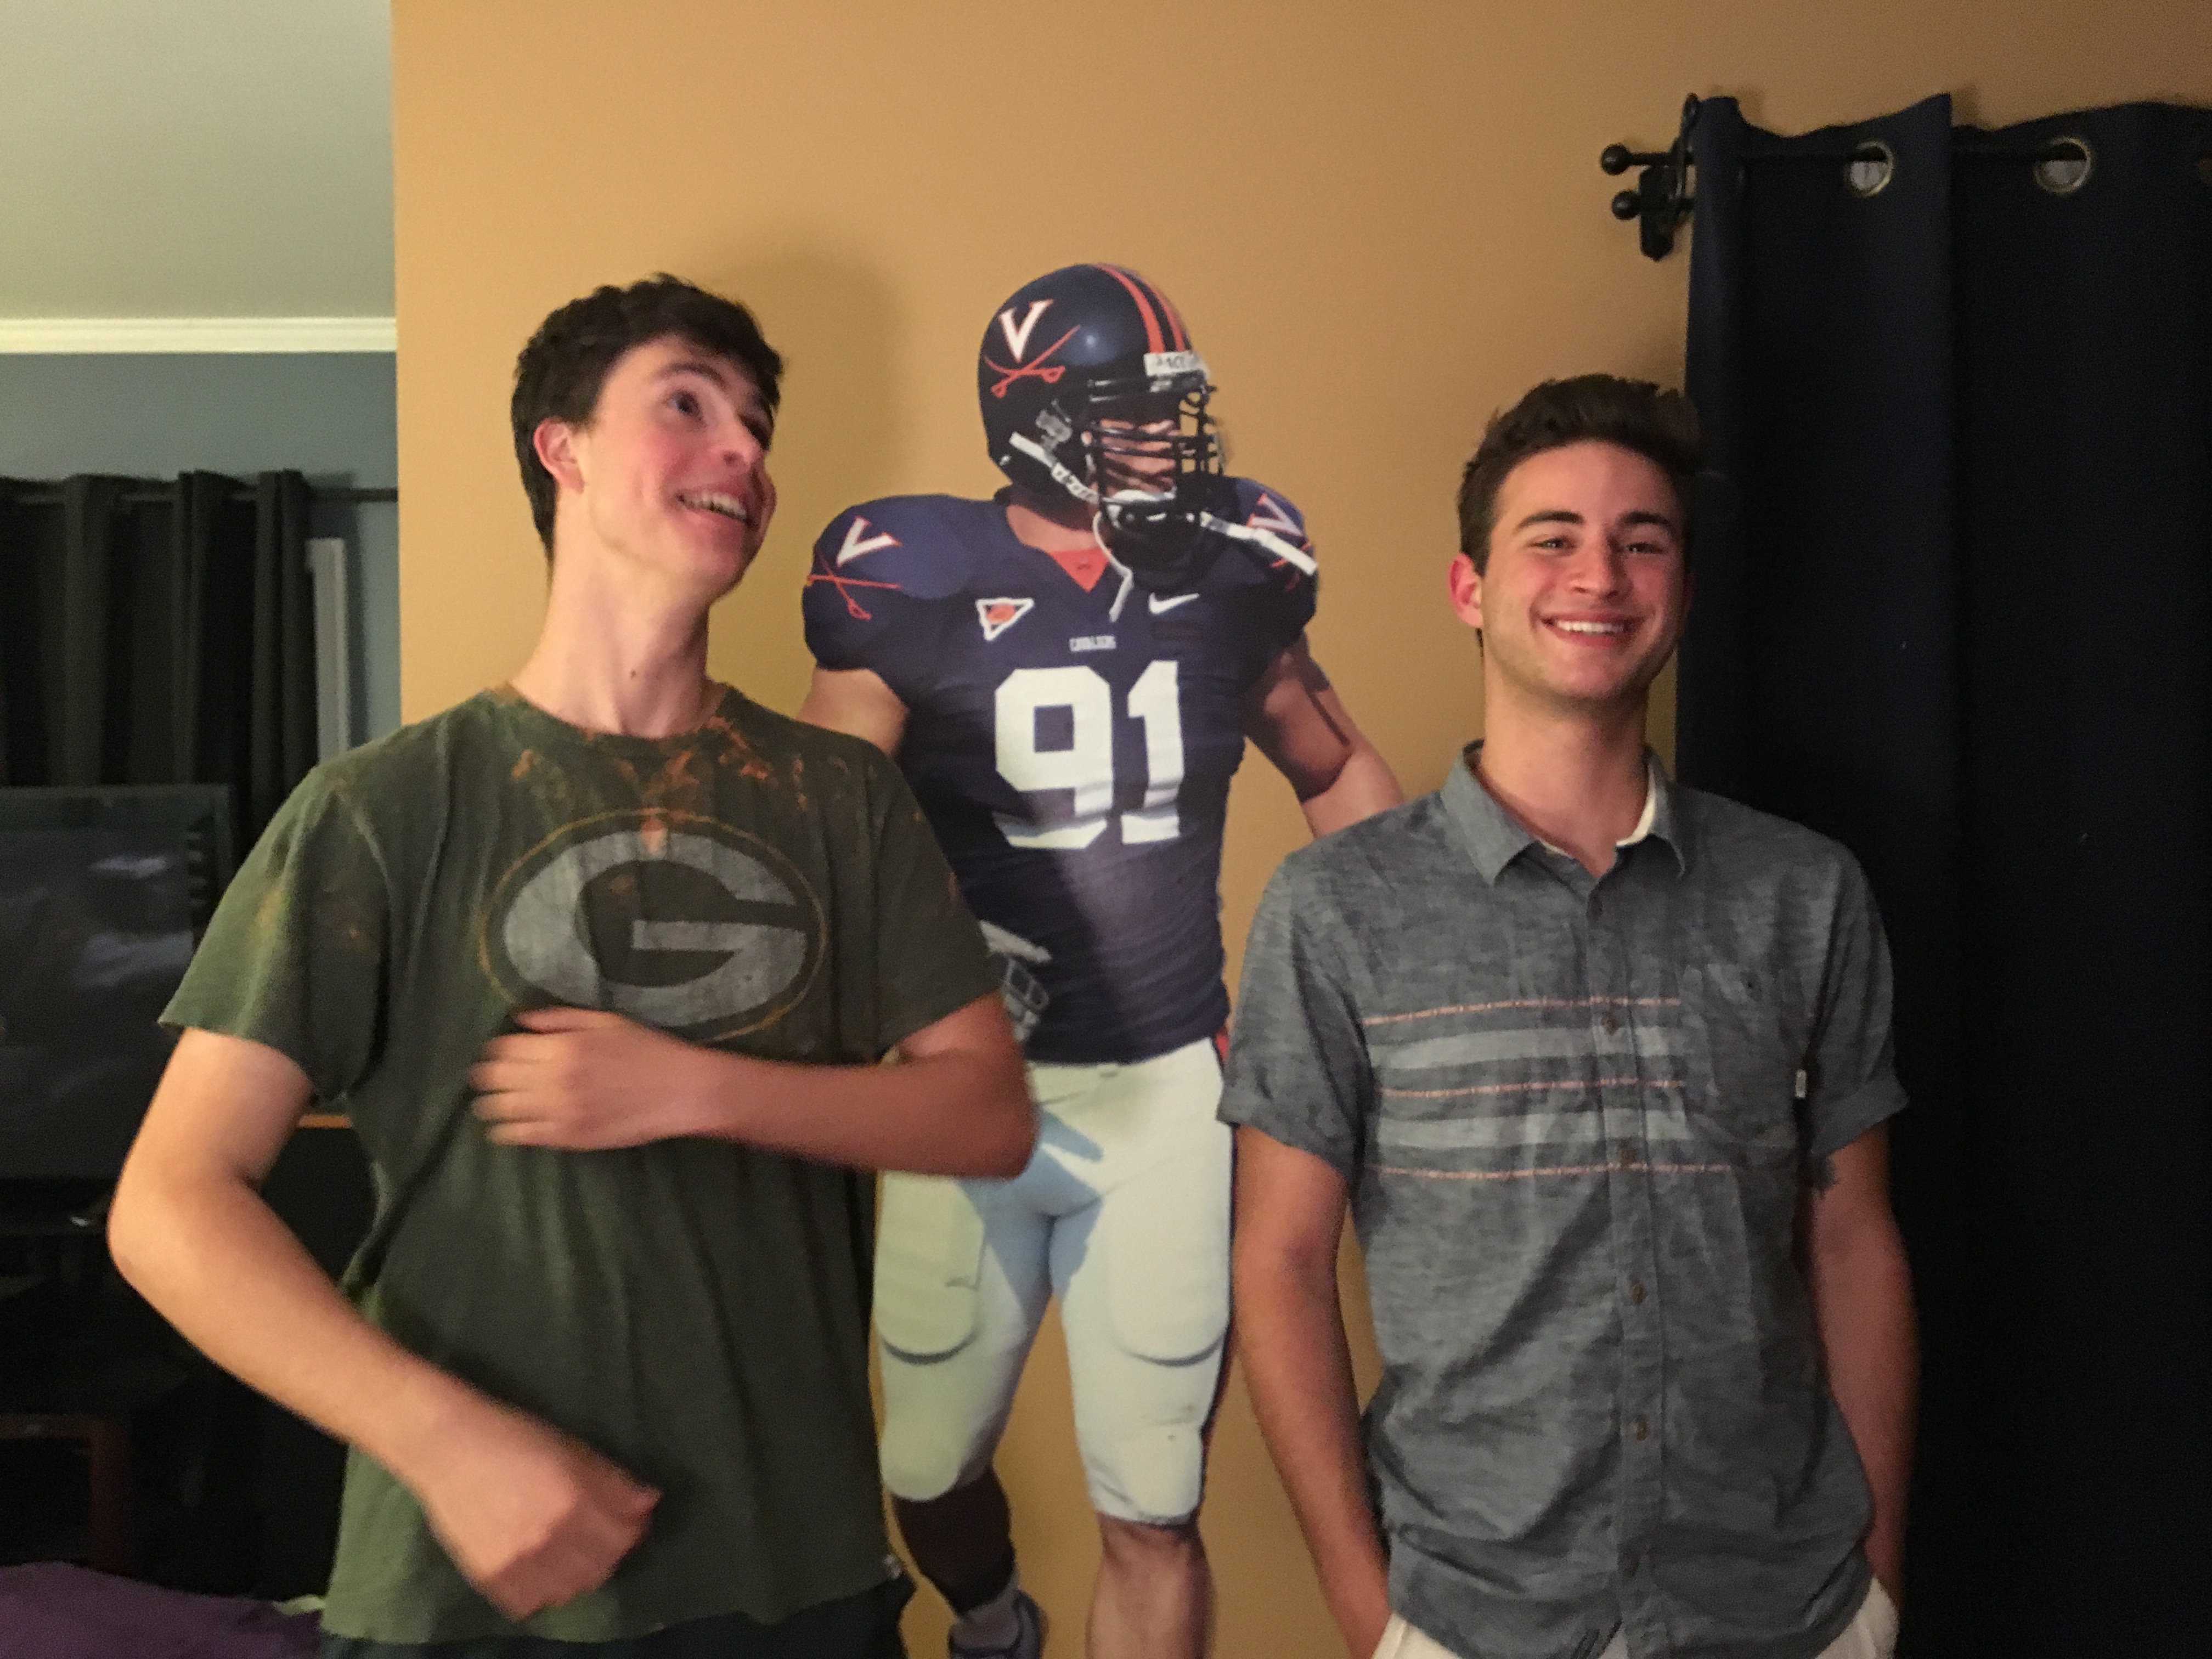 Mark and Samuel pose in front of a stick on wall graphic of a University of Virginia football player